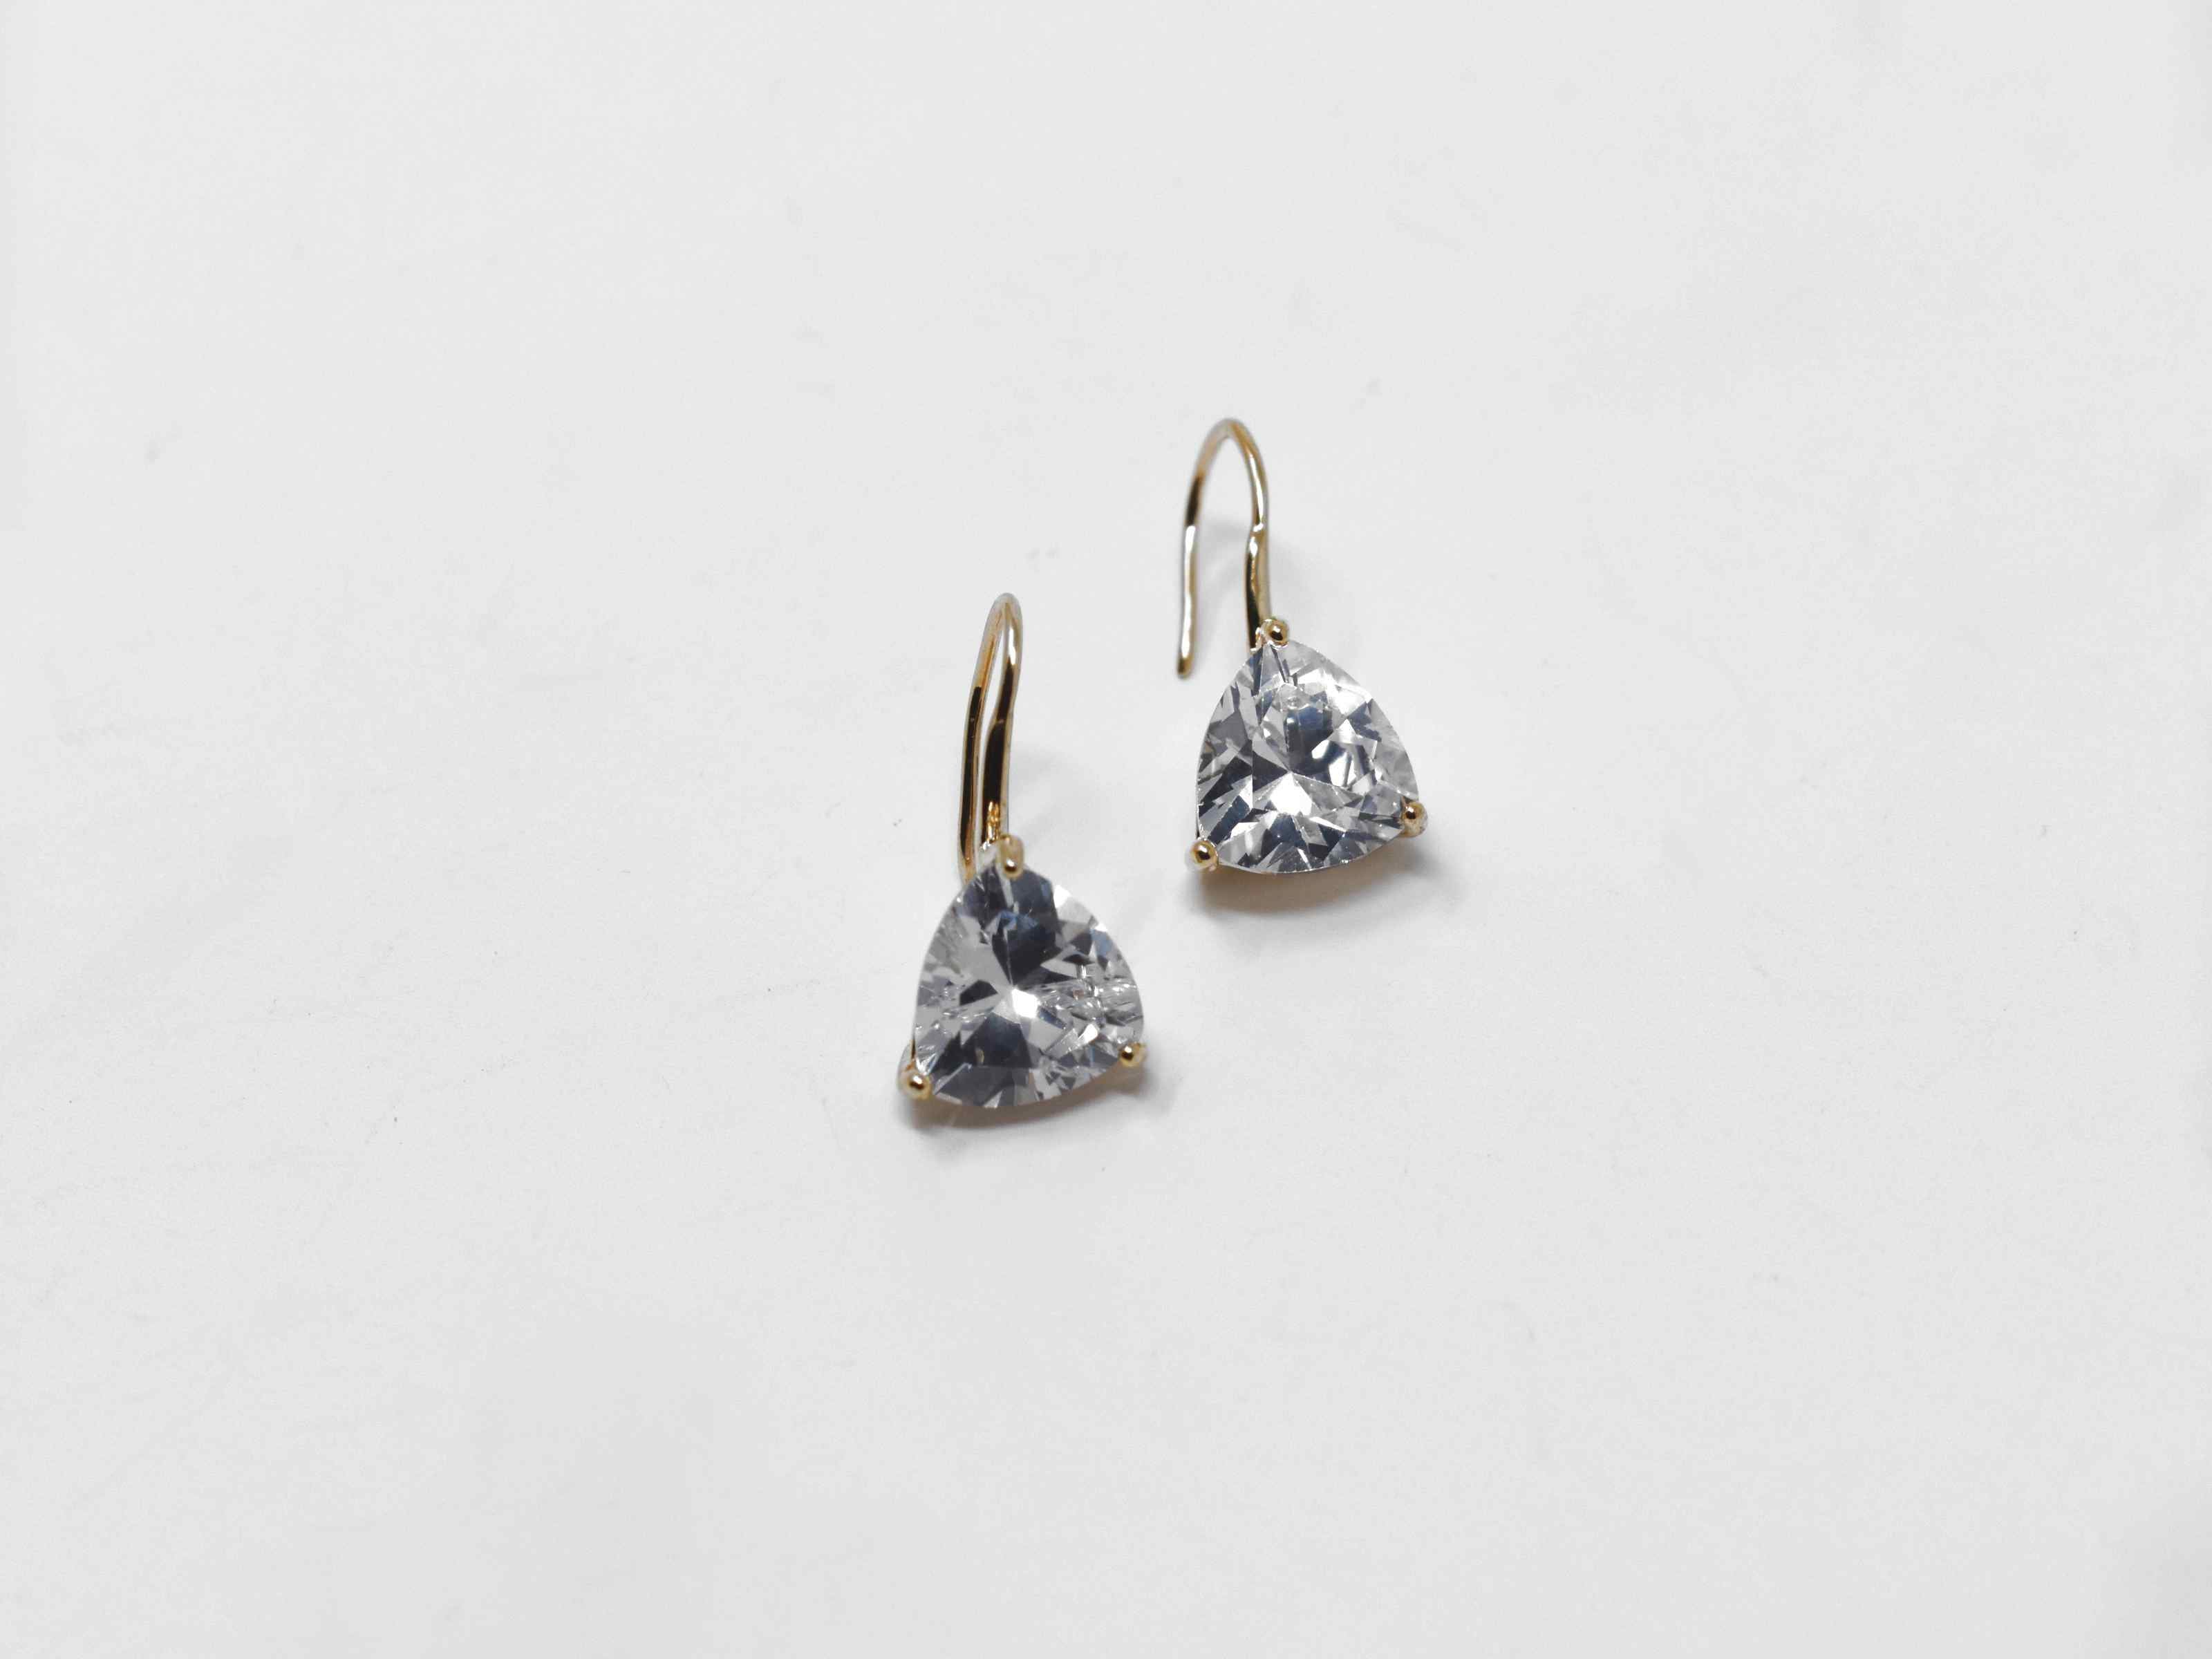 Our bluebell is a beautiful delicate chandelier knob earring. These earrings are a gold drop dangle earring with a fish hook clasp. They are 3/4 of an inch in length.